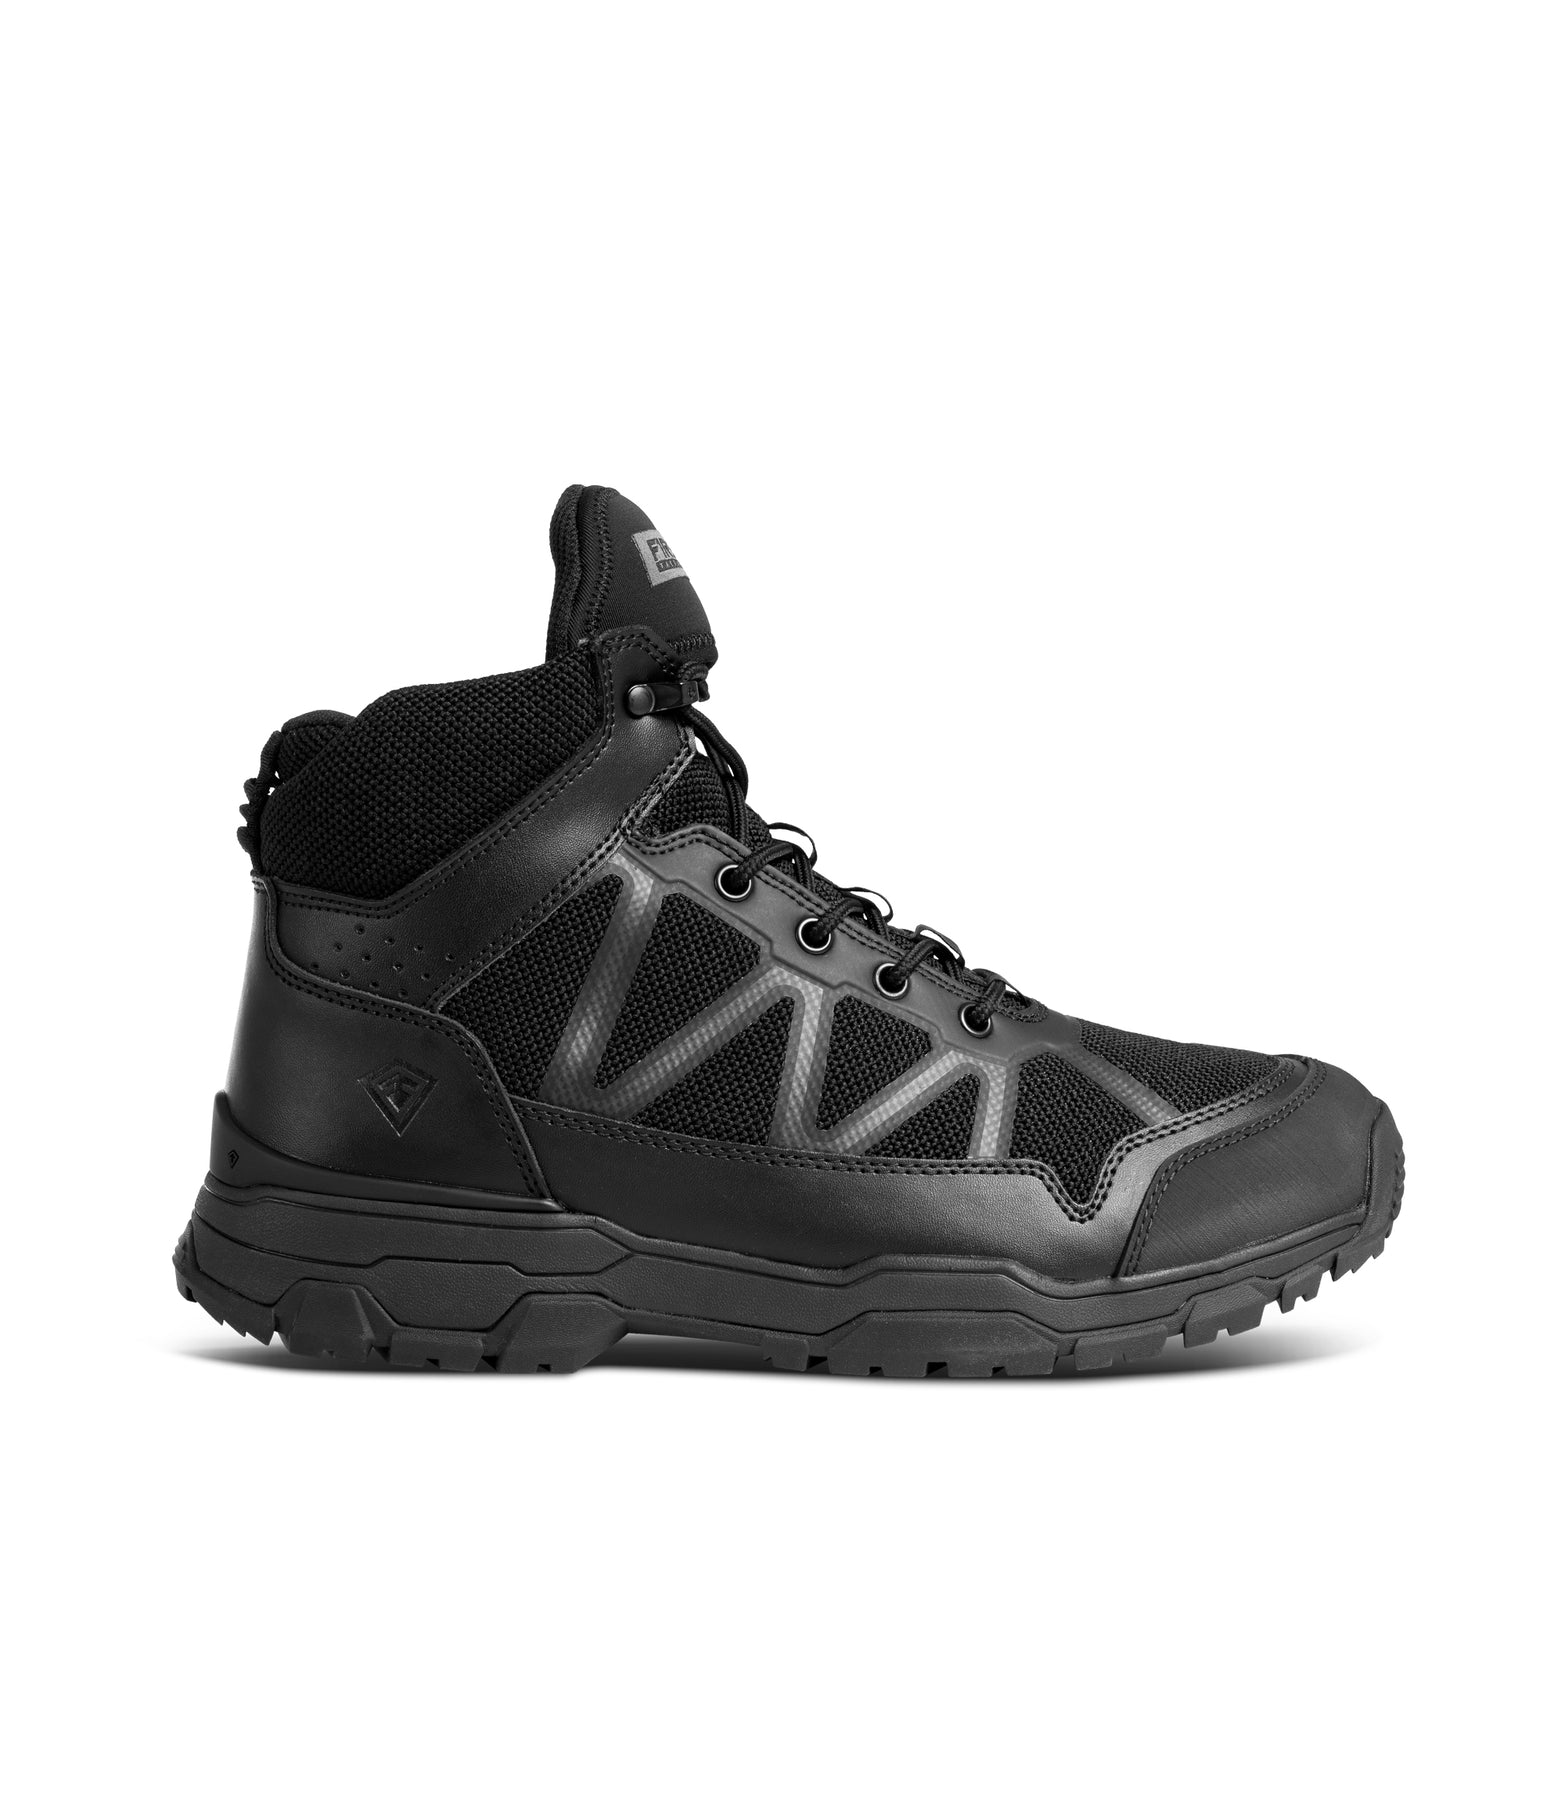 *ARRIVING SOON* First Tactical Men's 5" Operator Mid (165061) (Available in Black & Coyote)